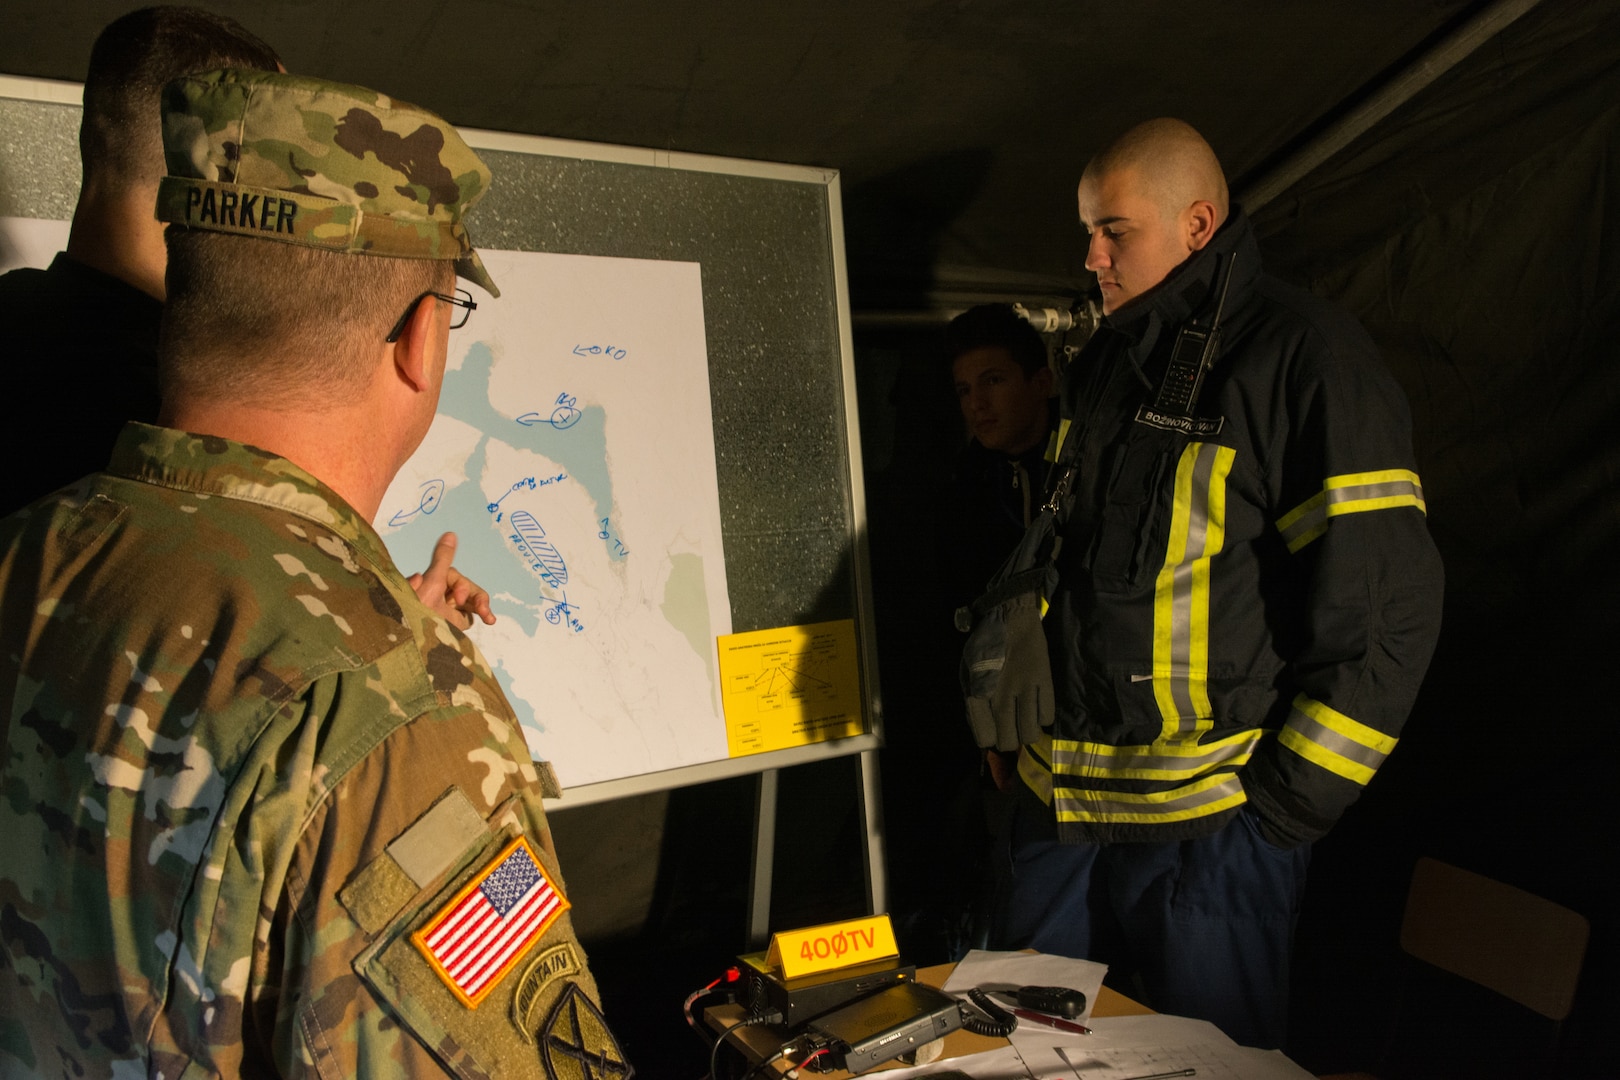 Maine works with its partners on emergency response